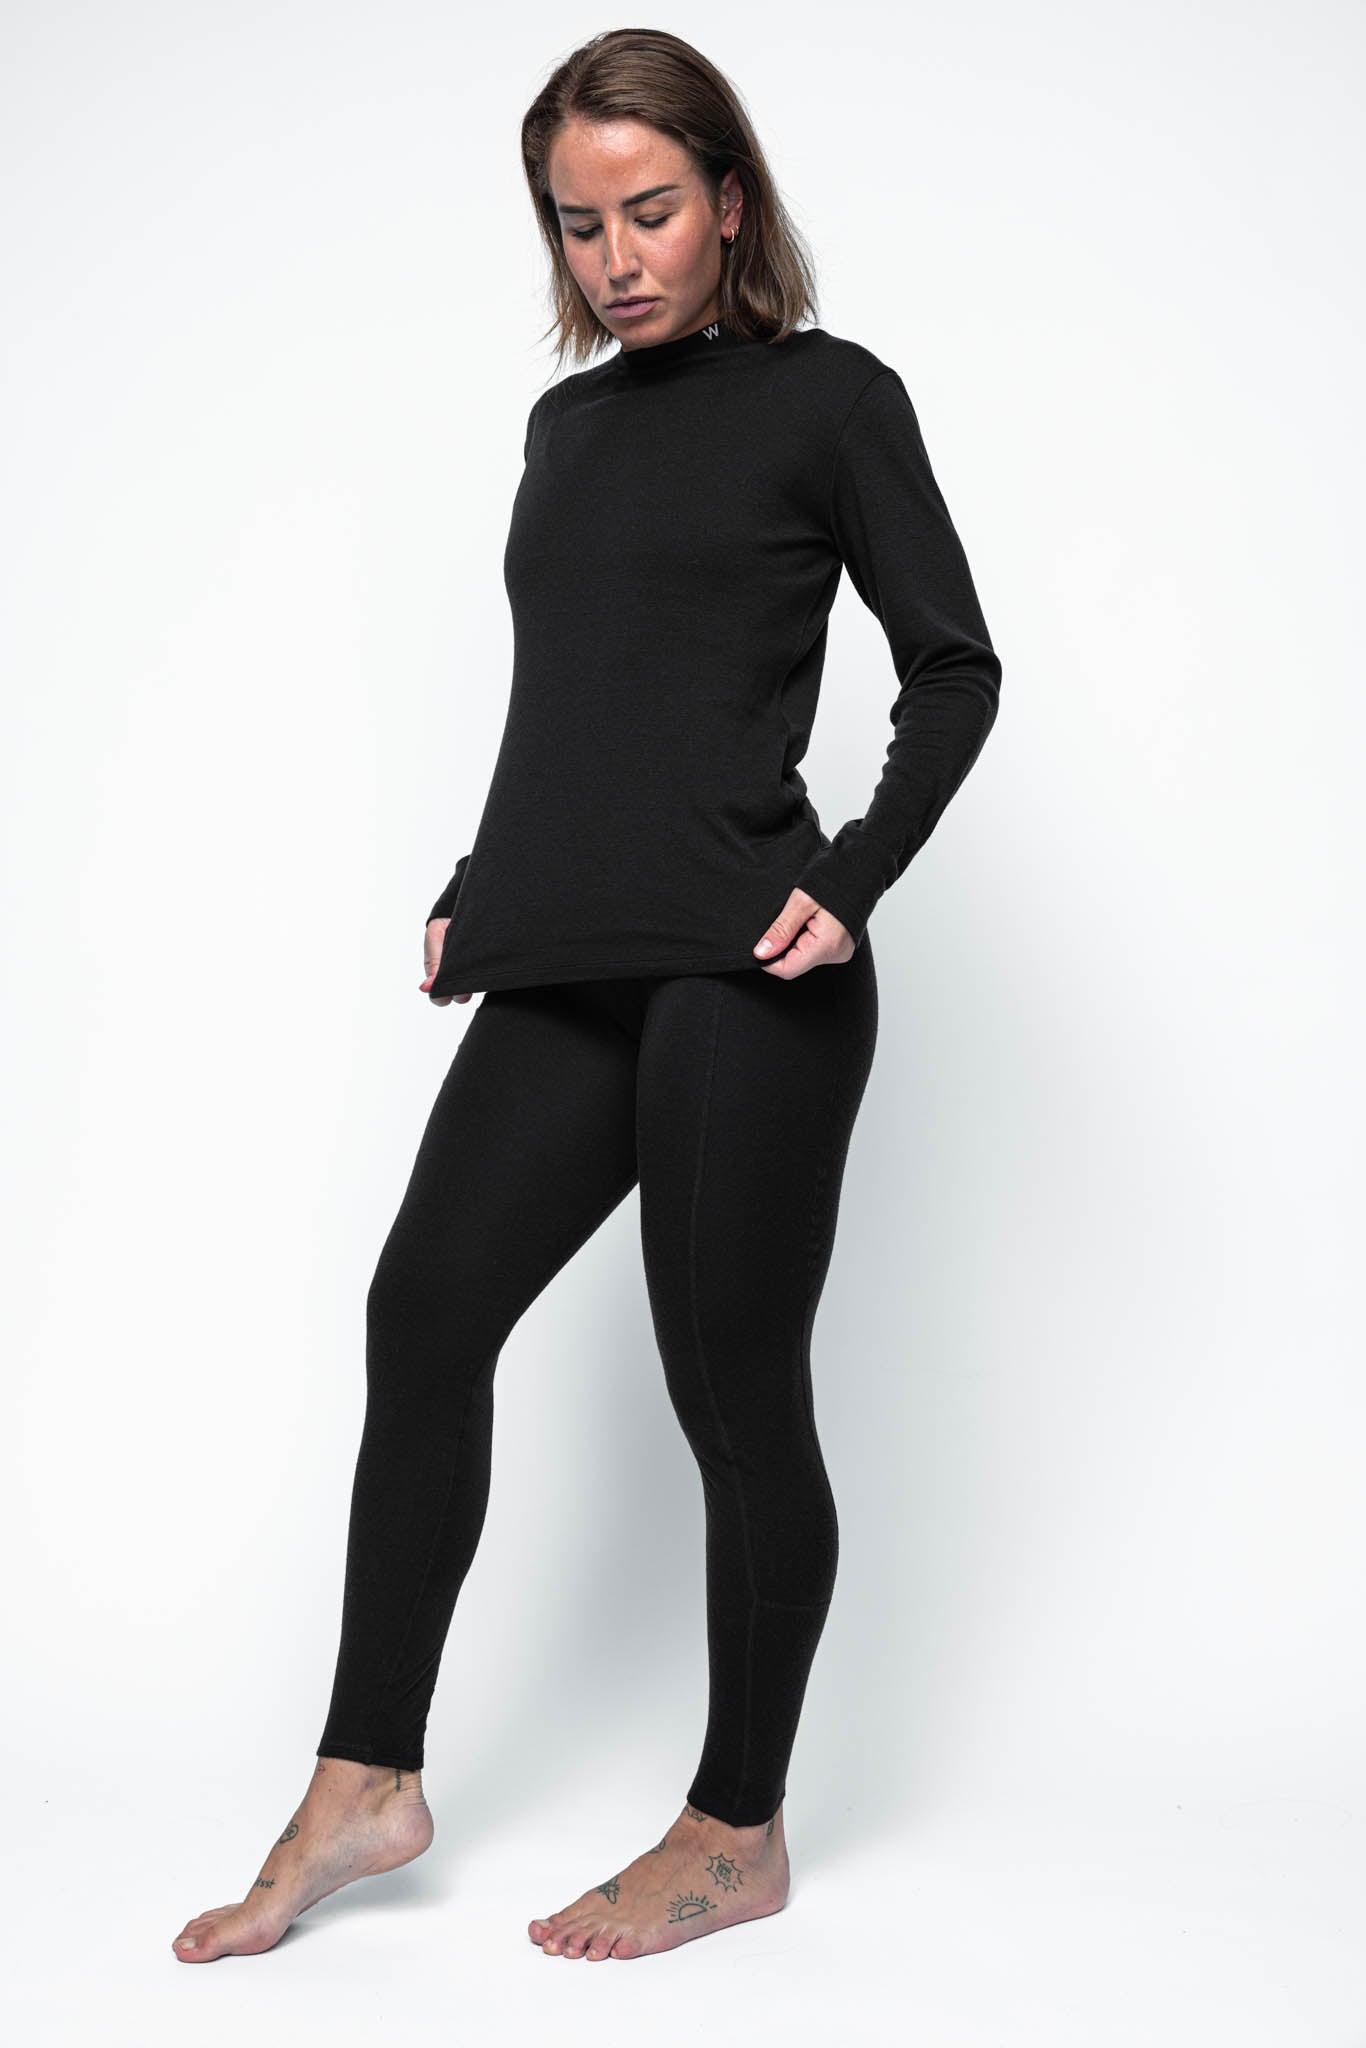 Brass Monkeys - 100% Pure Merino Wool - Leggings - Made in New Zealand -  Warm & Soft Womens Thermal Base Layer Pants - Perfect for Sports, Black  Small : : Sports & Outdoors